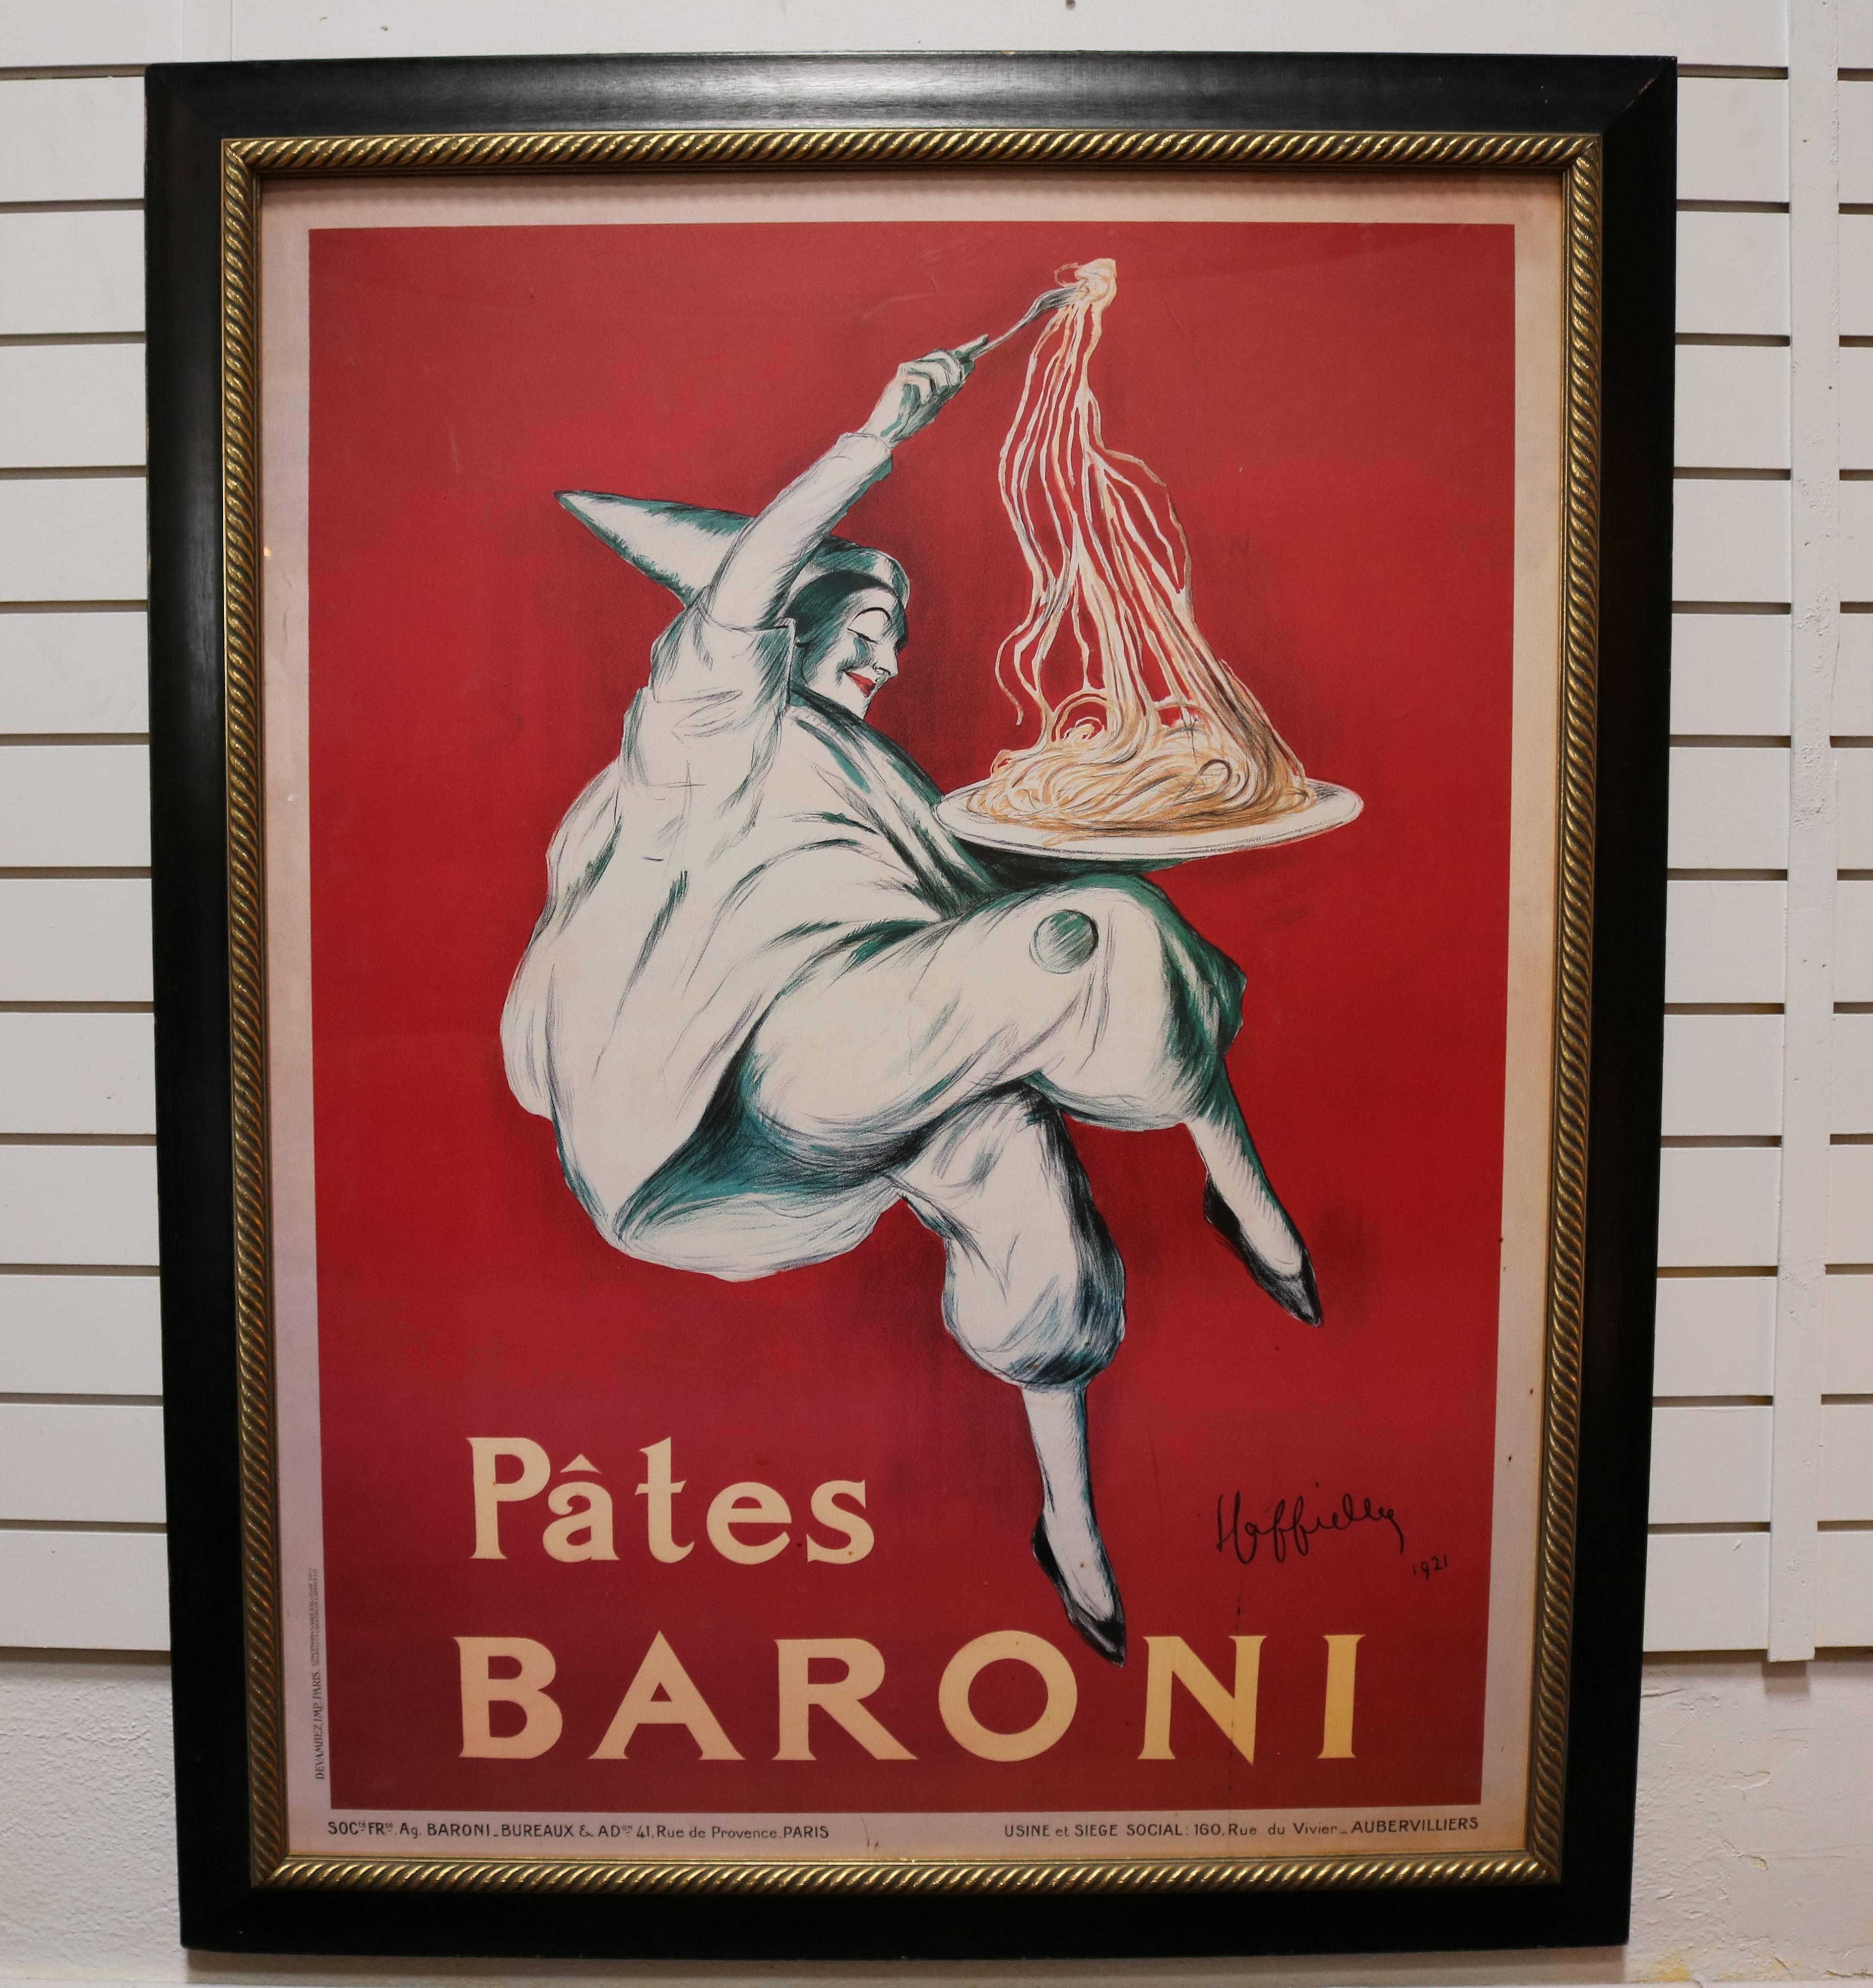 Large-scale poster, reproduction  of a Pastes Baroni/ Baroni Pasta ad by Italian/French artist Leonetto Cappiello. 

Though he had no formal training, Leonetto Cappiello's illustrations have become world famous as he produced over 530 advertising